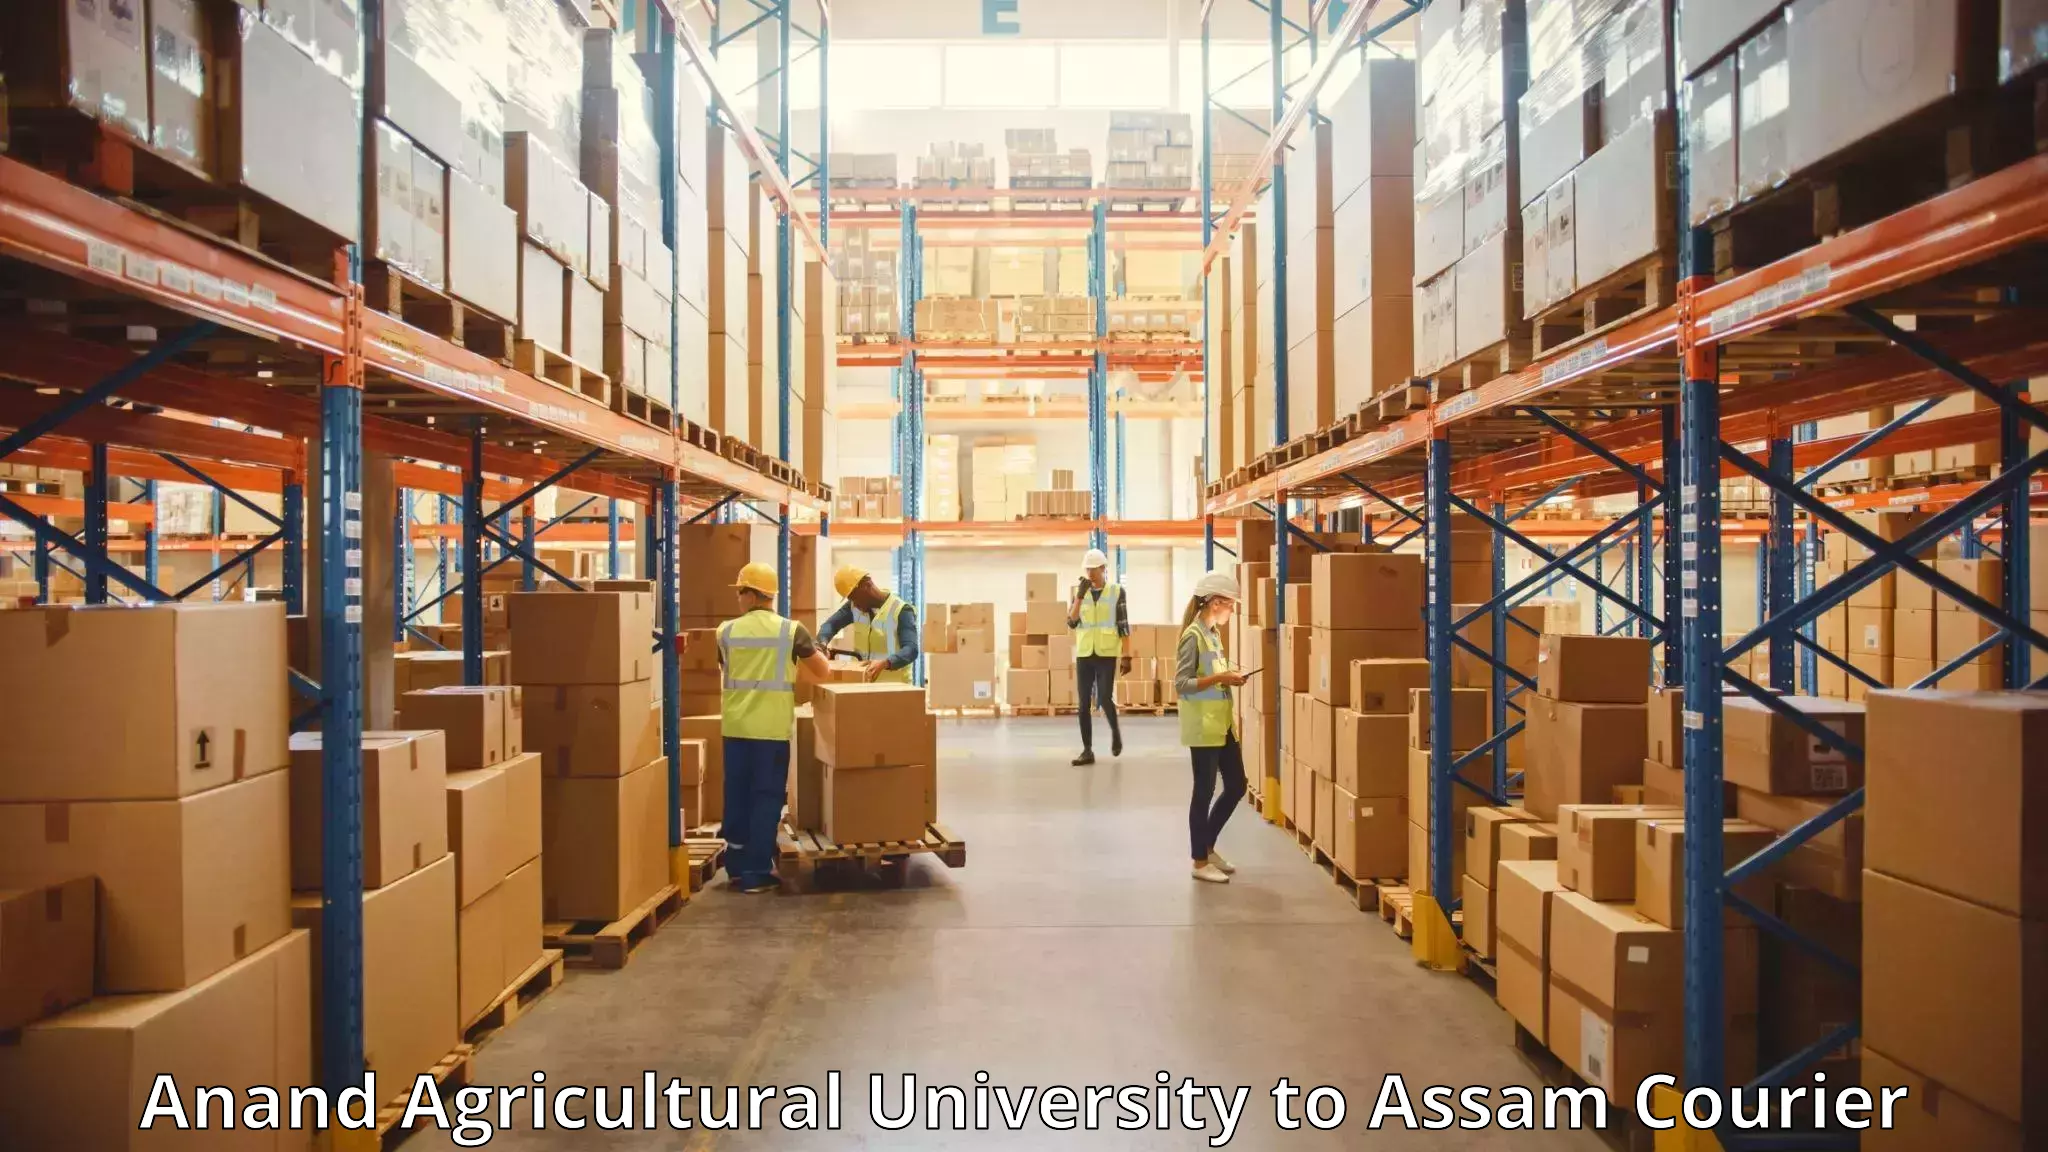 Rural baggage transport Anand Agricultural University to Guwahati University